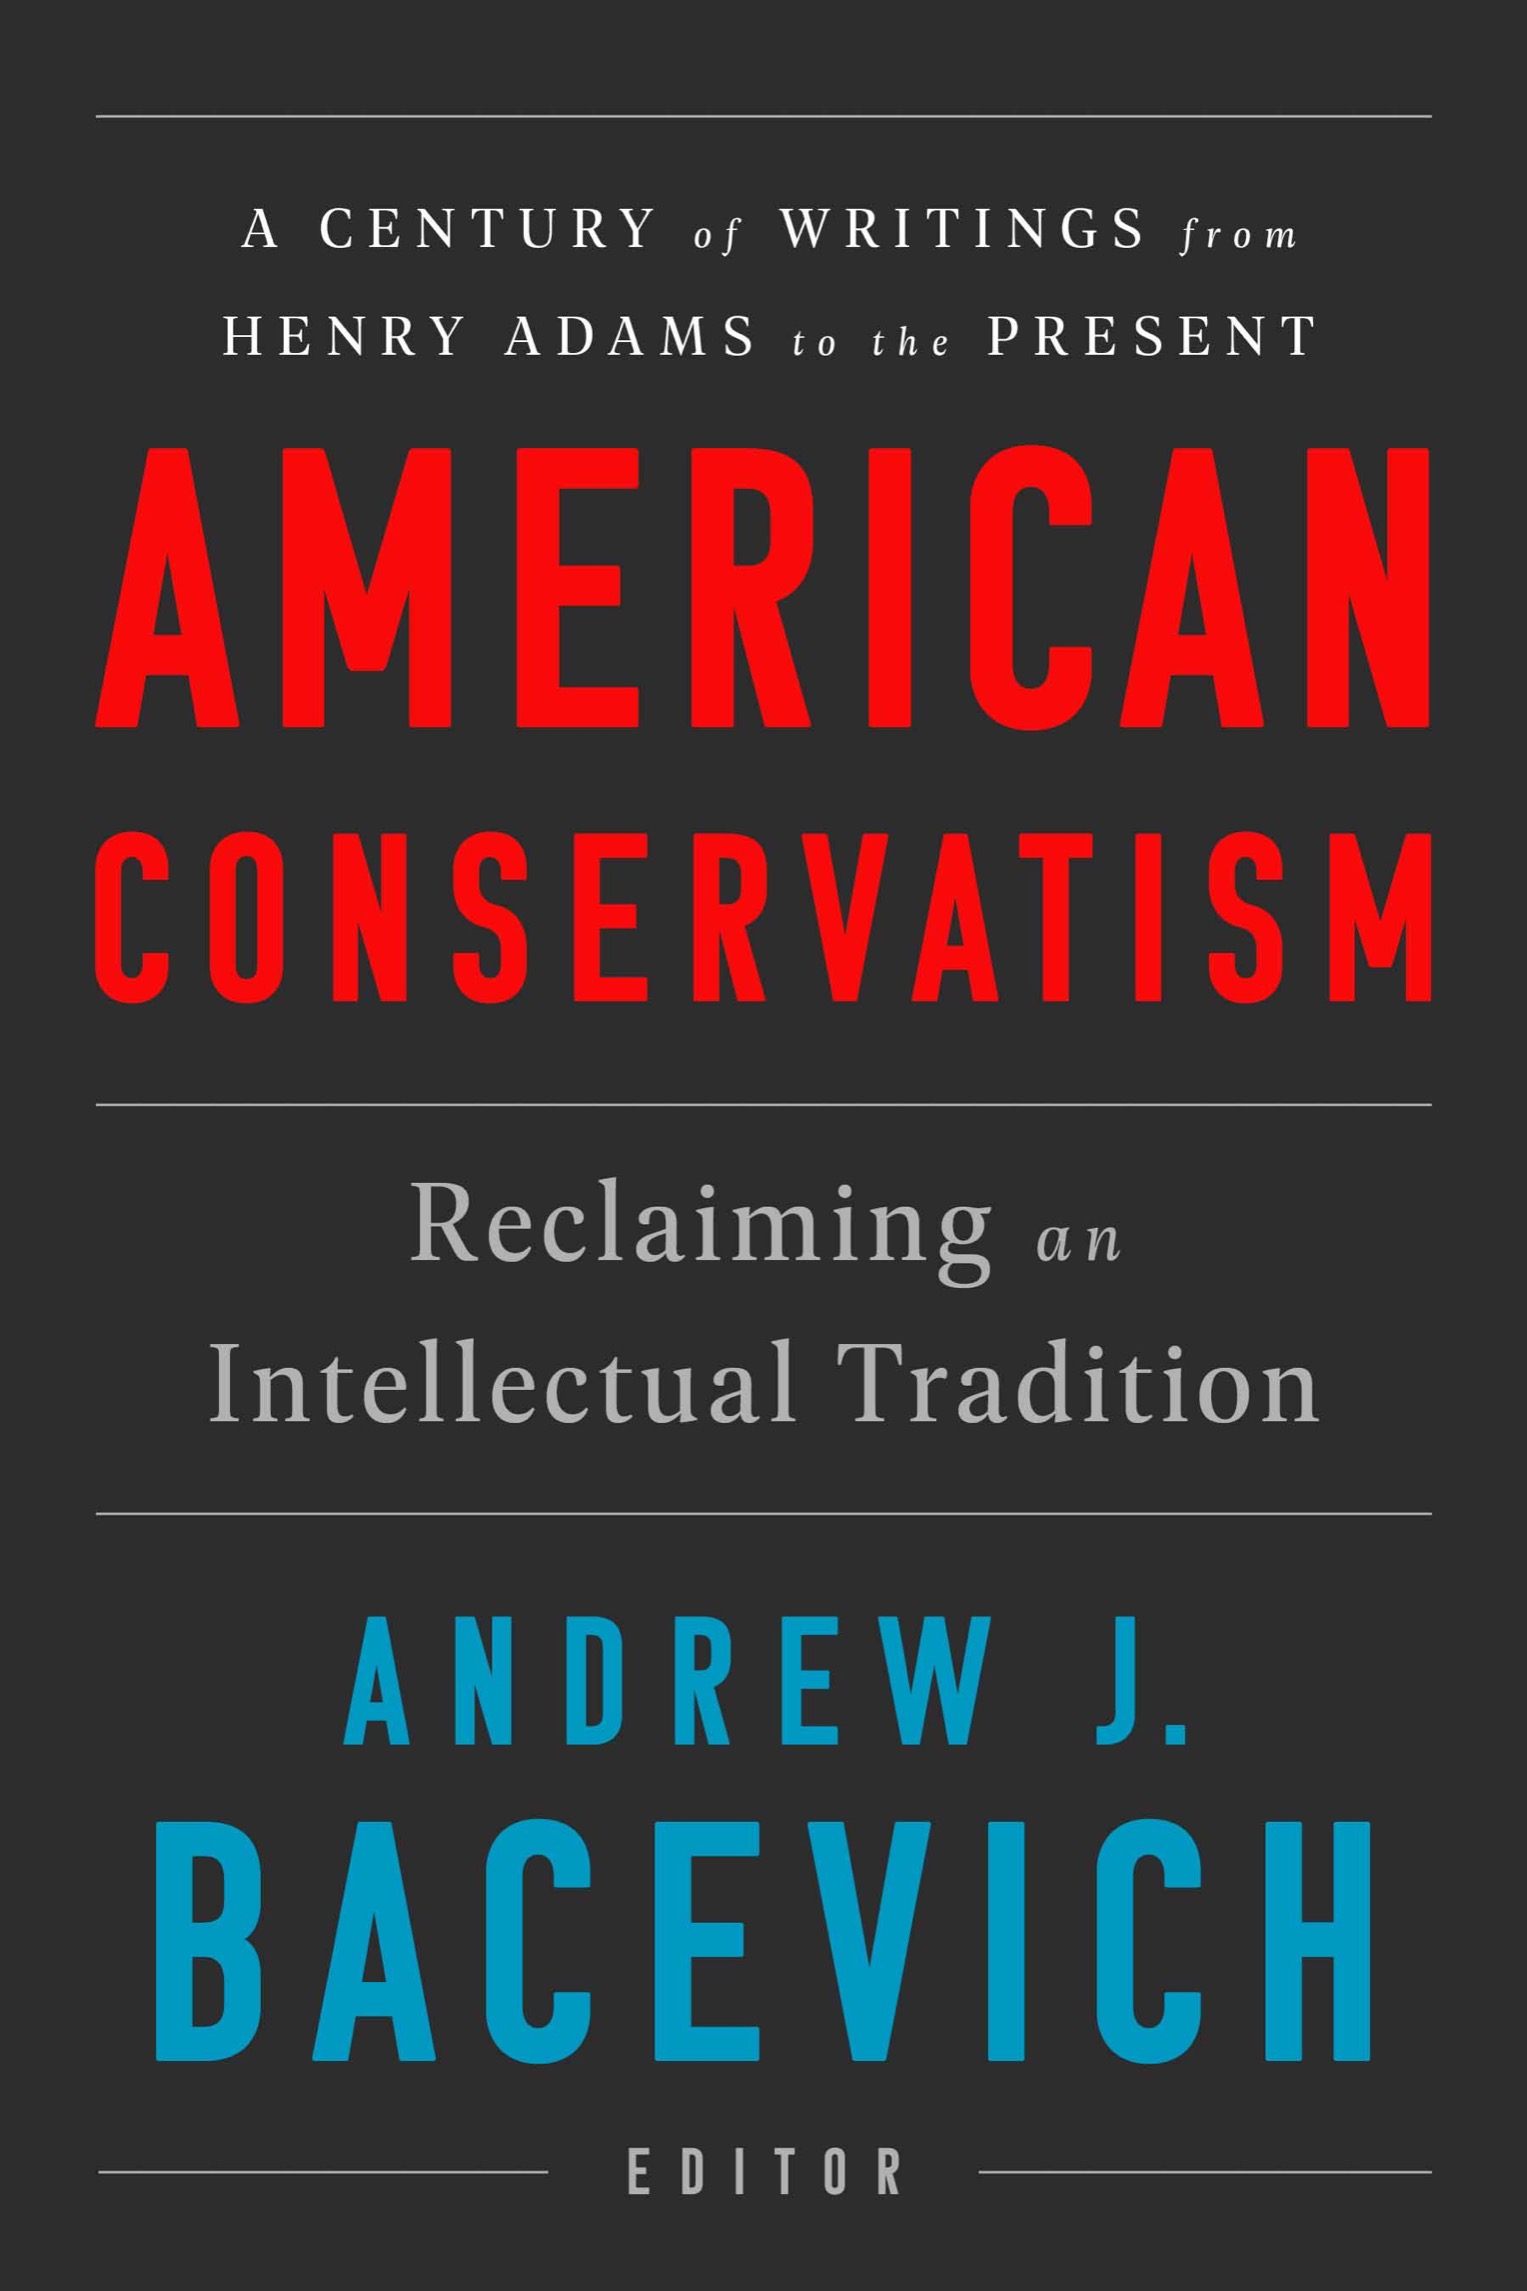 American Conservatism Reclaiming an Intellectual Tradition - image 1